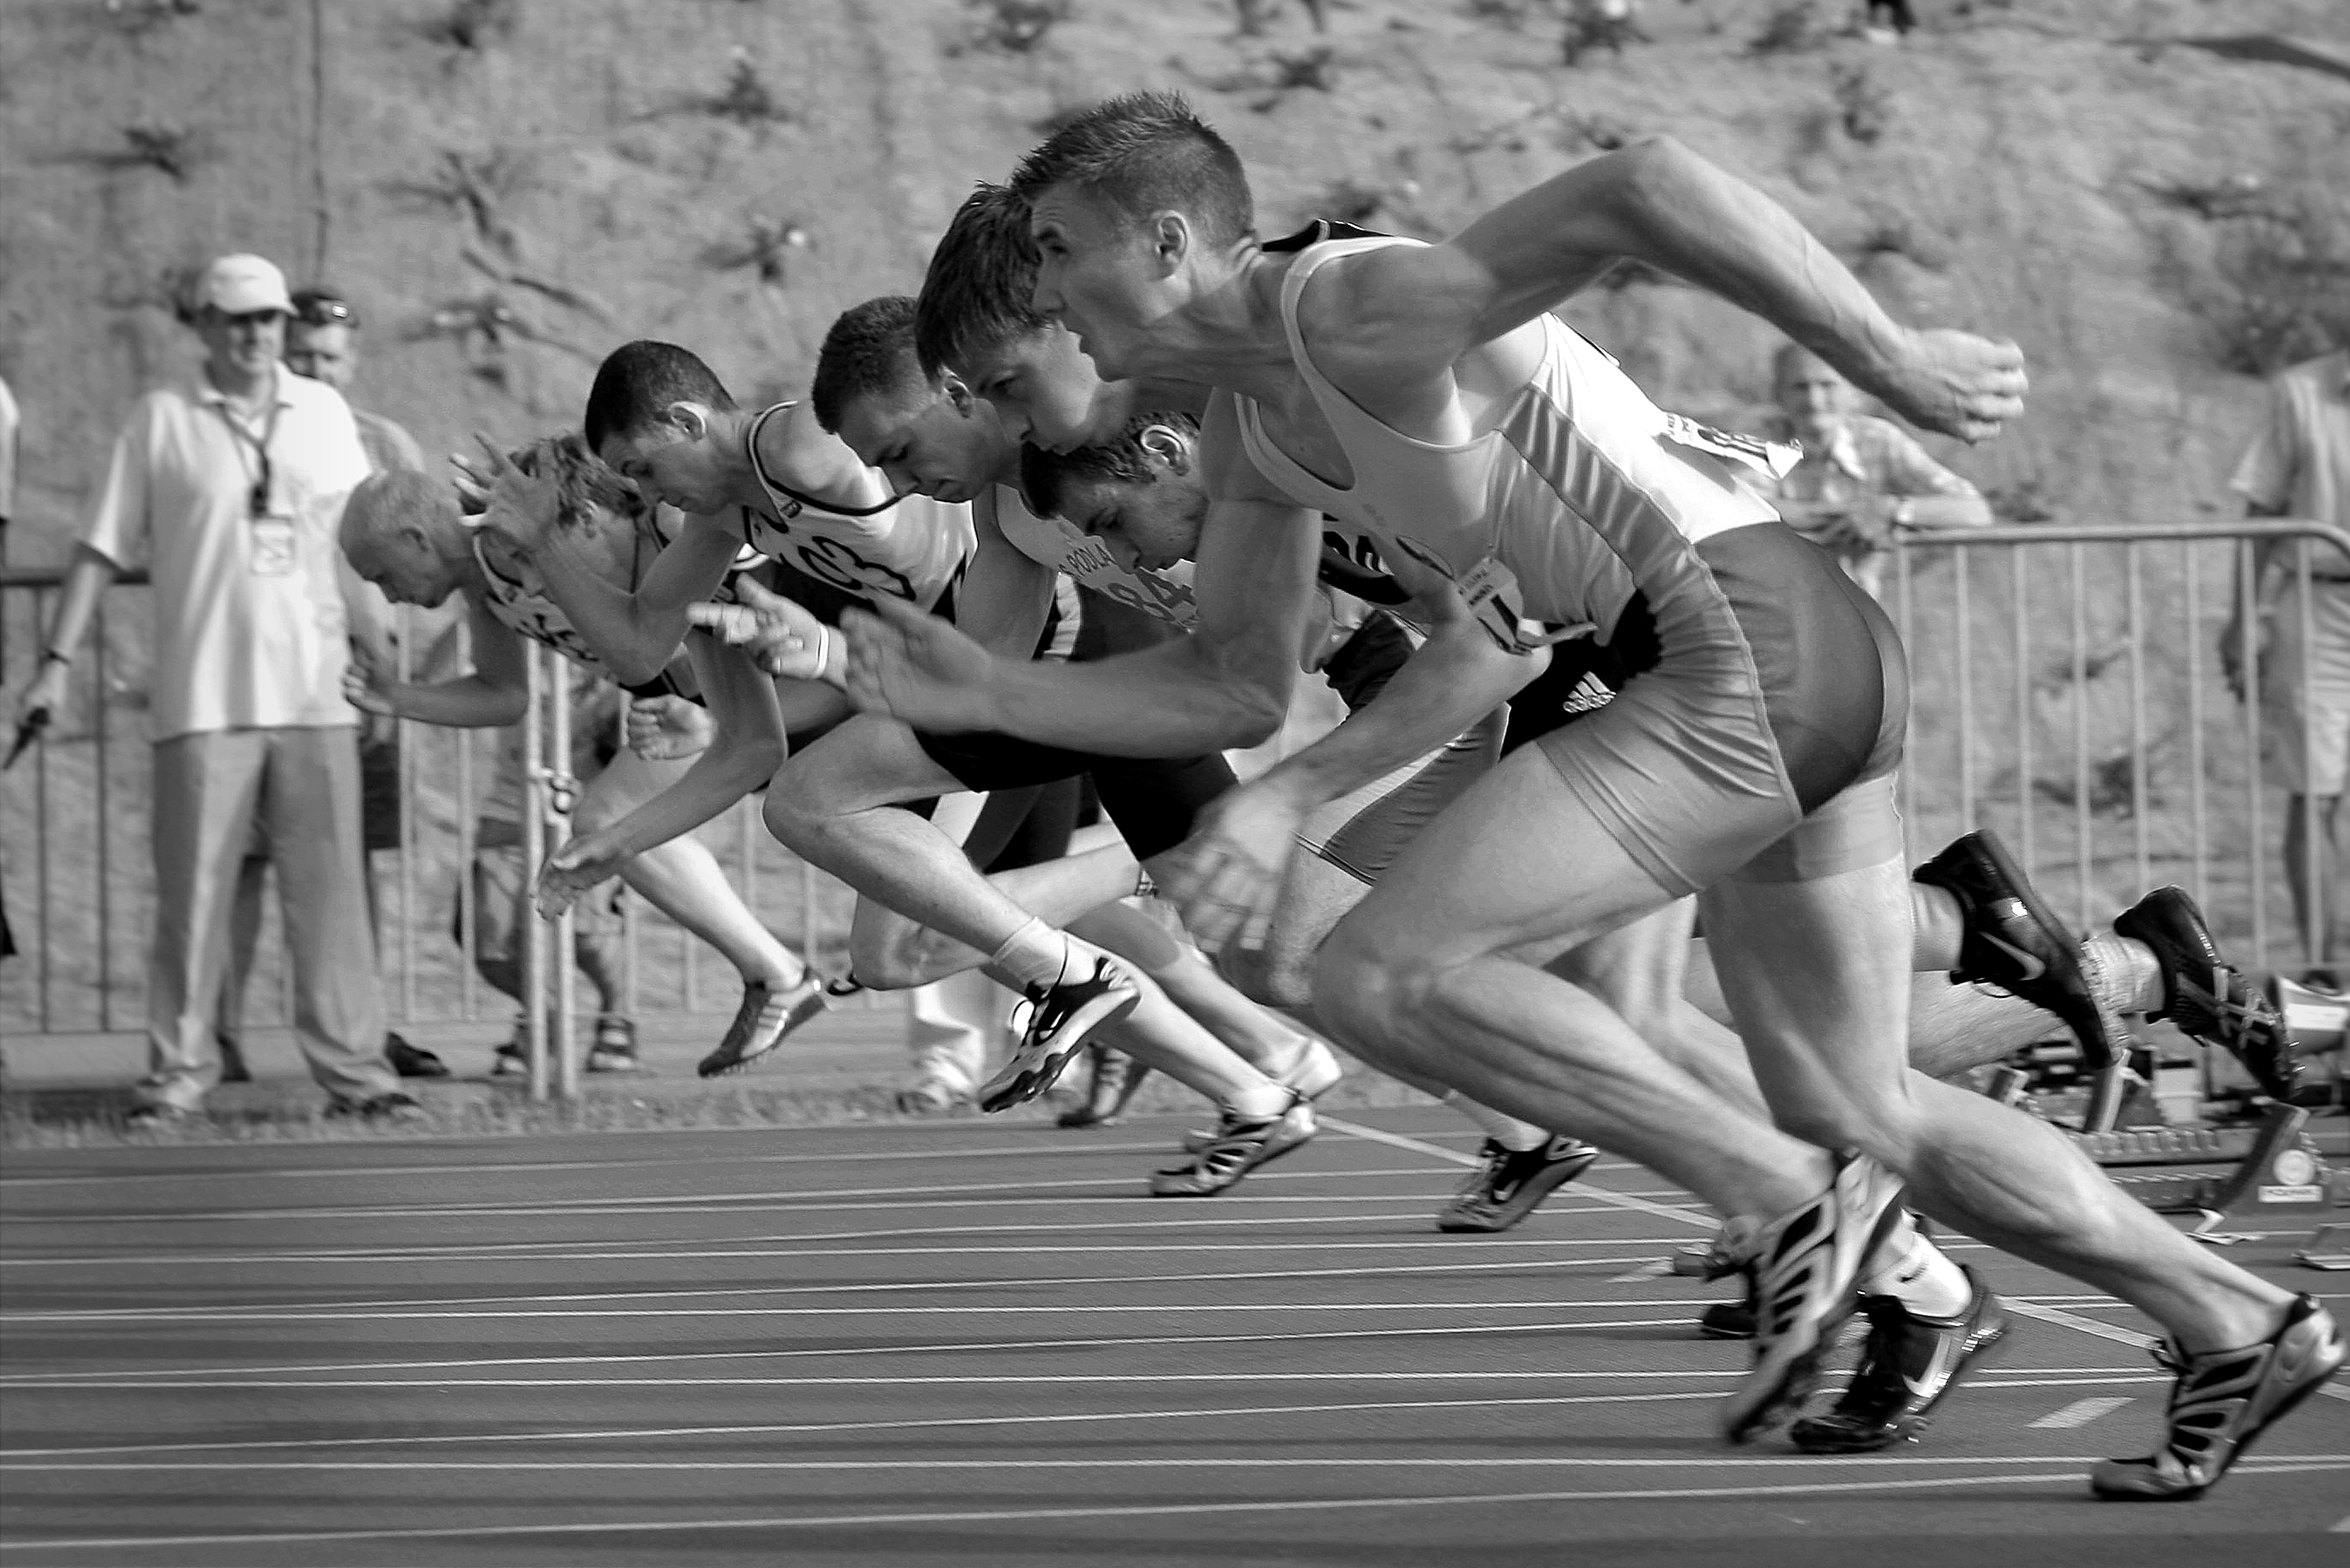 Athletes running on track and field oval in grayscale photography